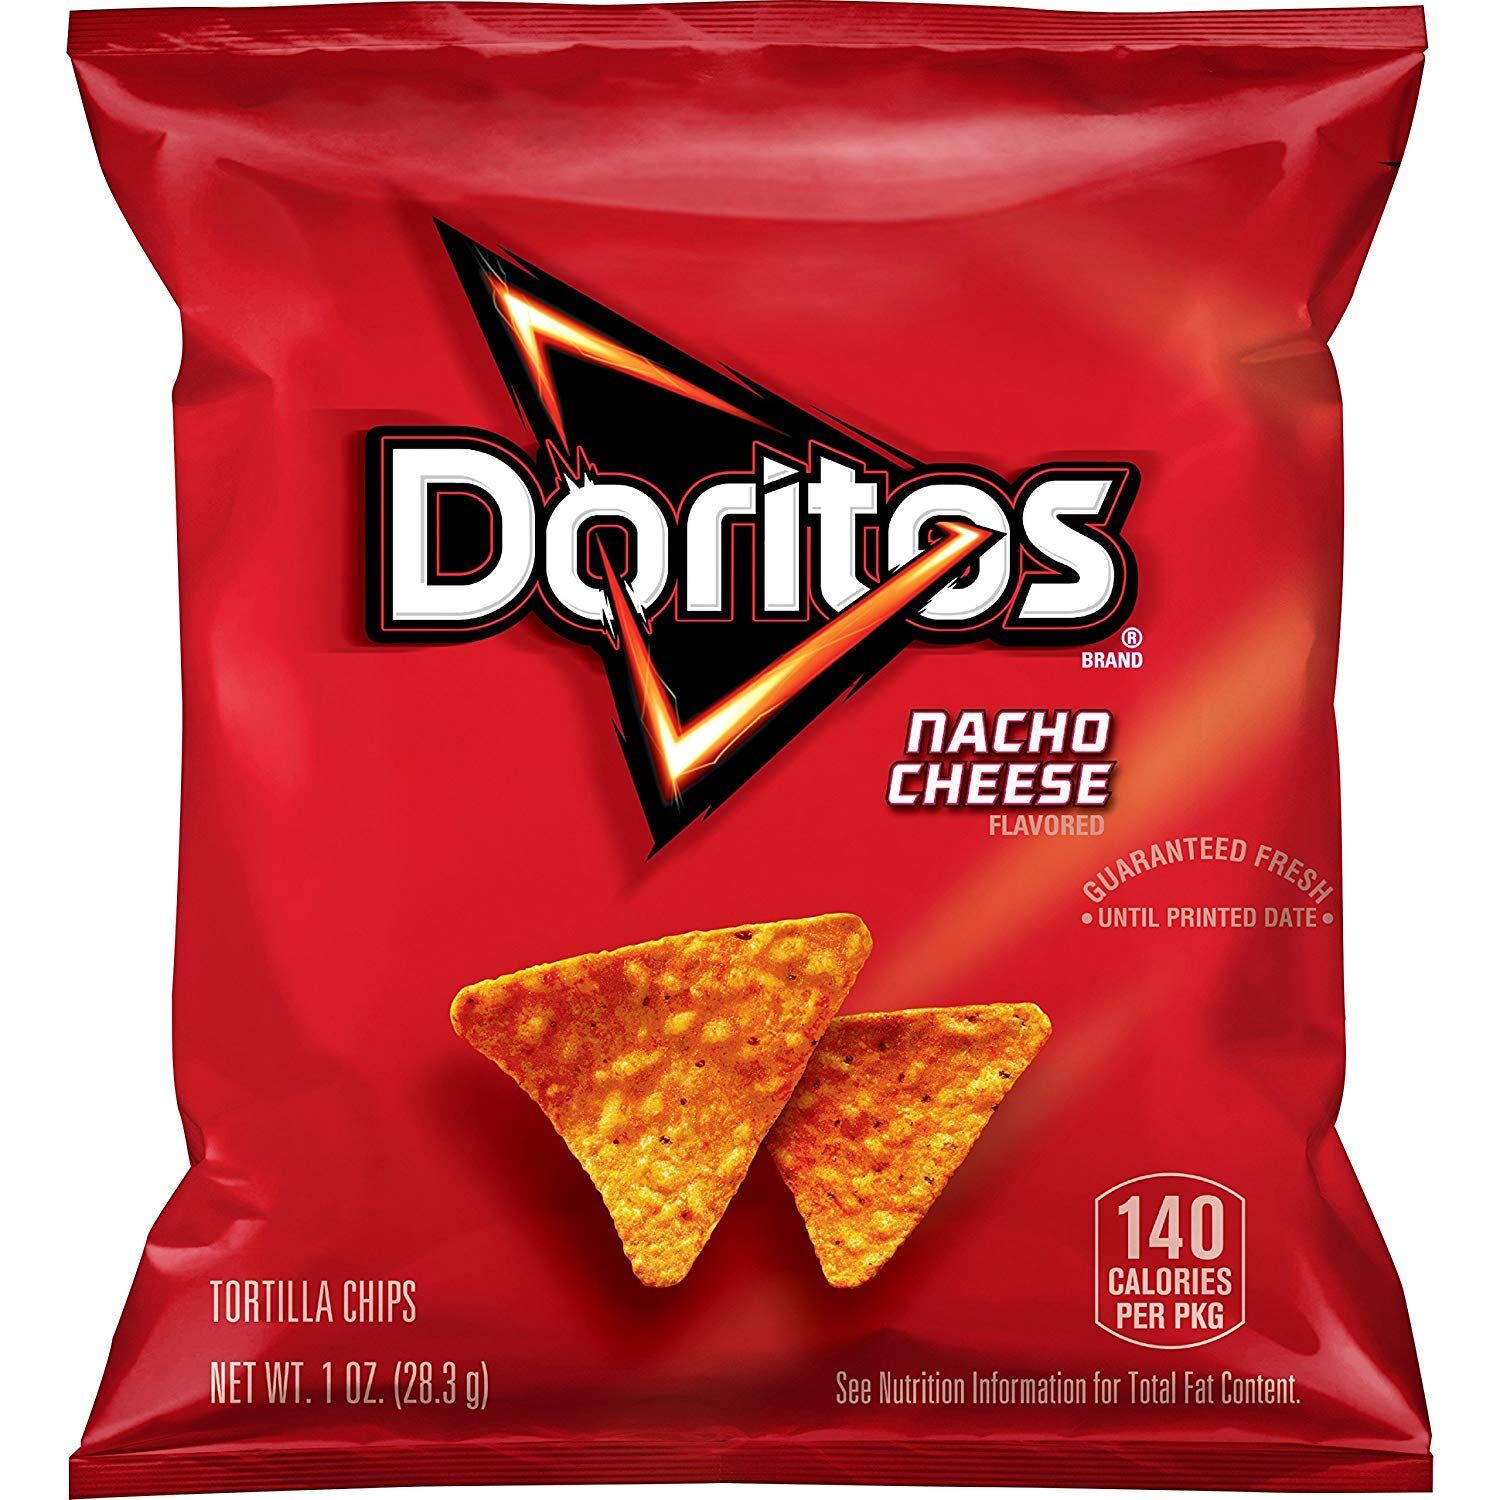 https://static.wikia.nocookie.net/the-snack-encyclopedia/images/2/28/Doritos.jpg/revision/latest/scale-to-width-down/1500?cb=20200706025410